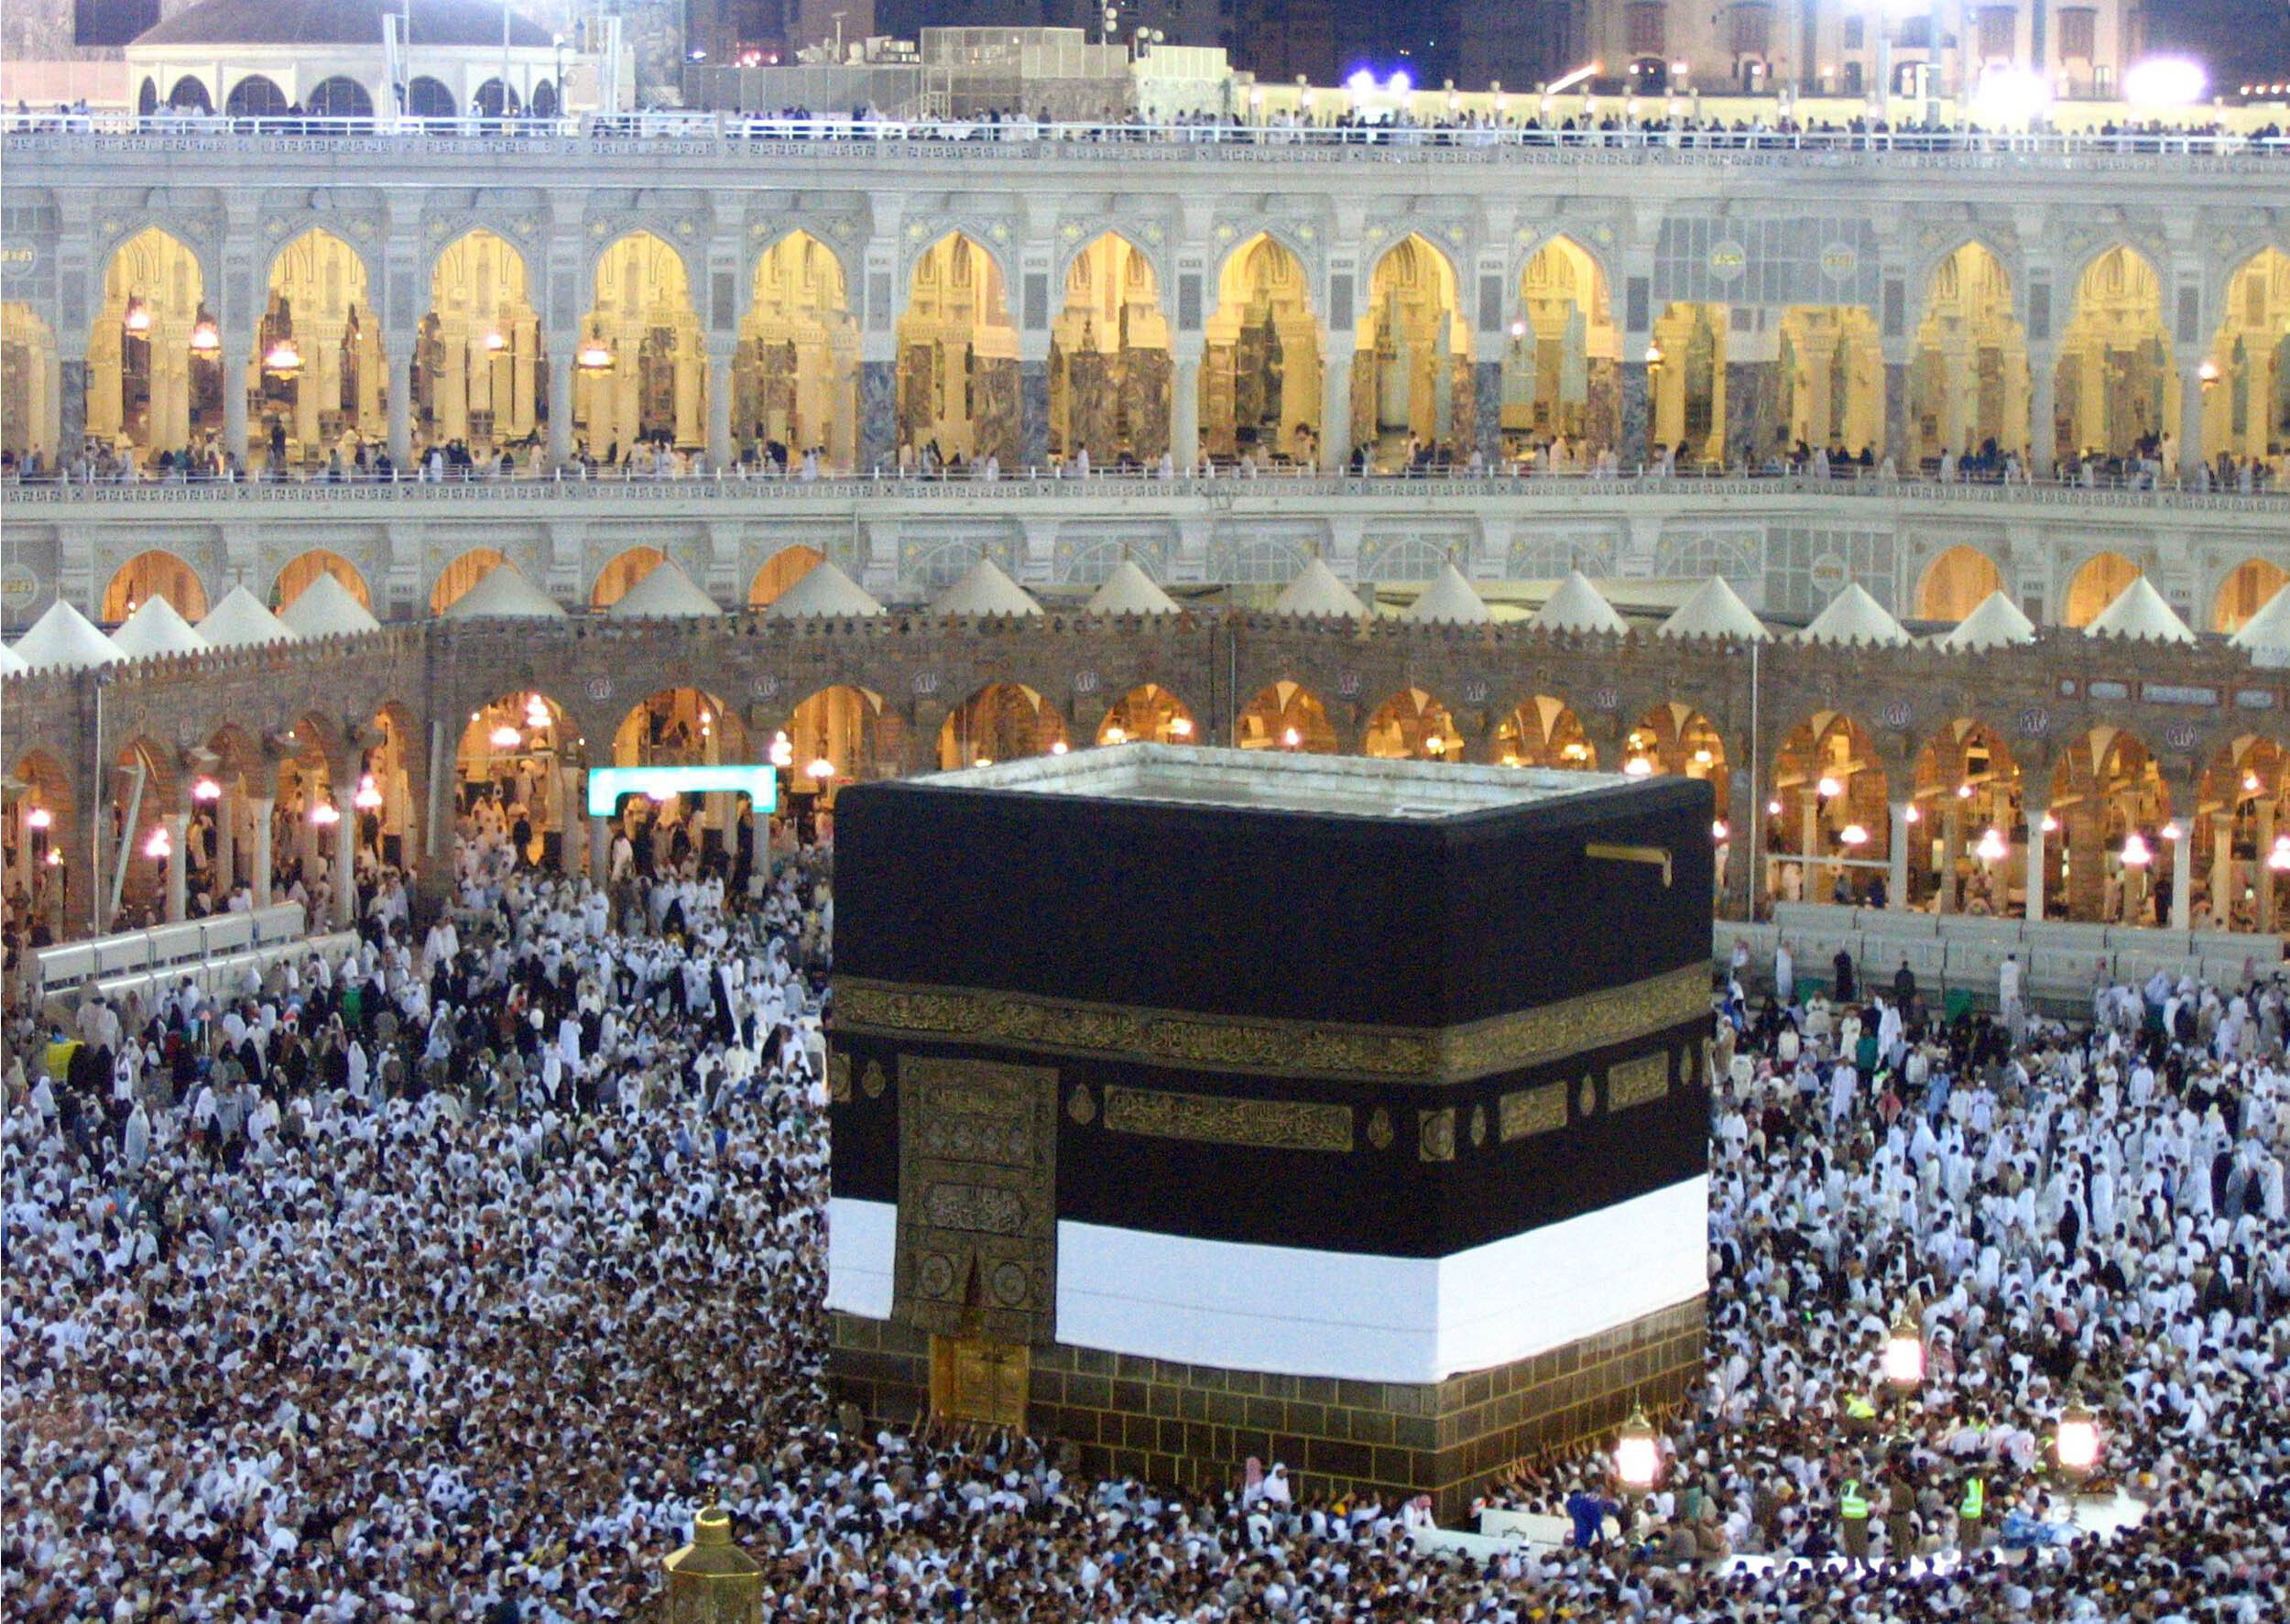 The Kaaba is the place Muslims visit during the ritual pilgrimages of the Ḥajj and umrah.